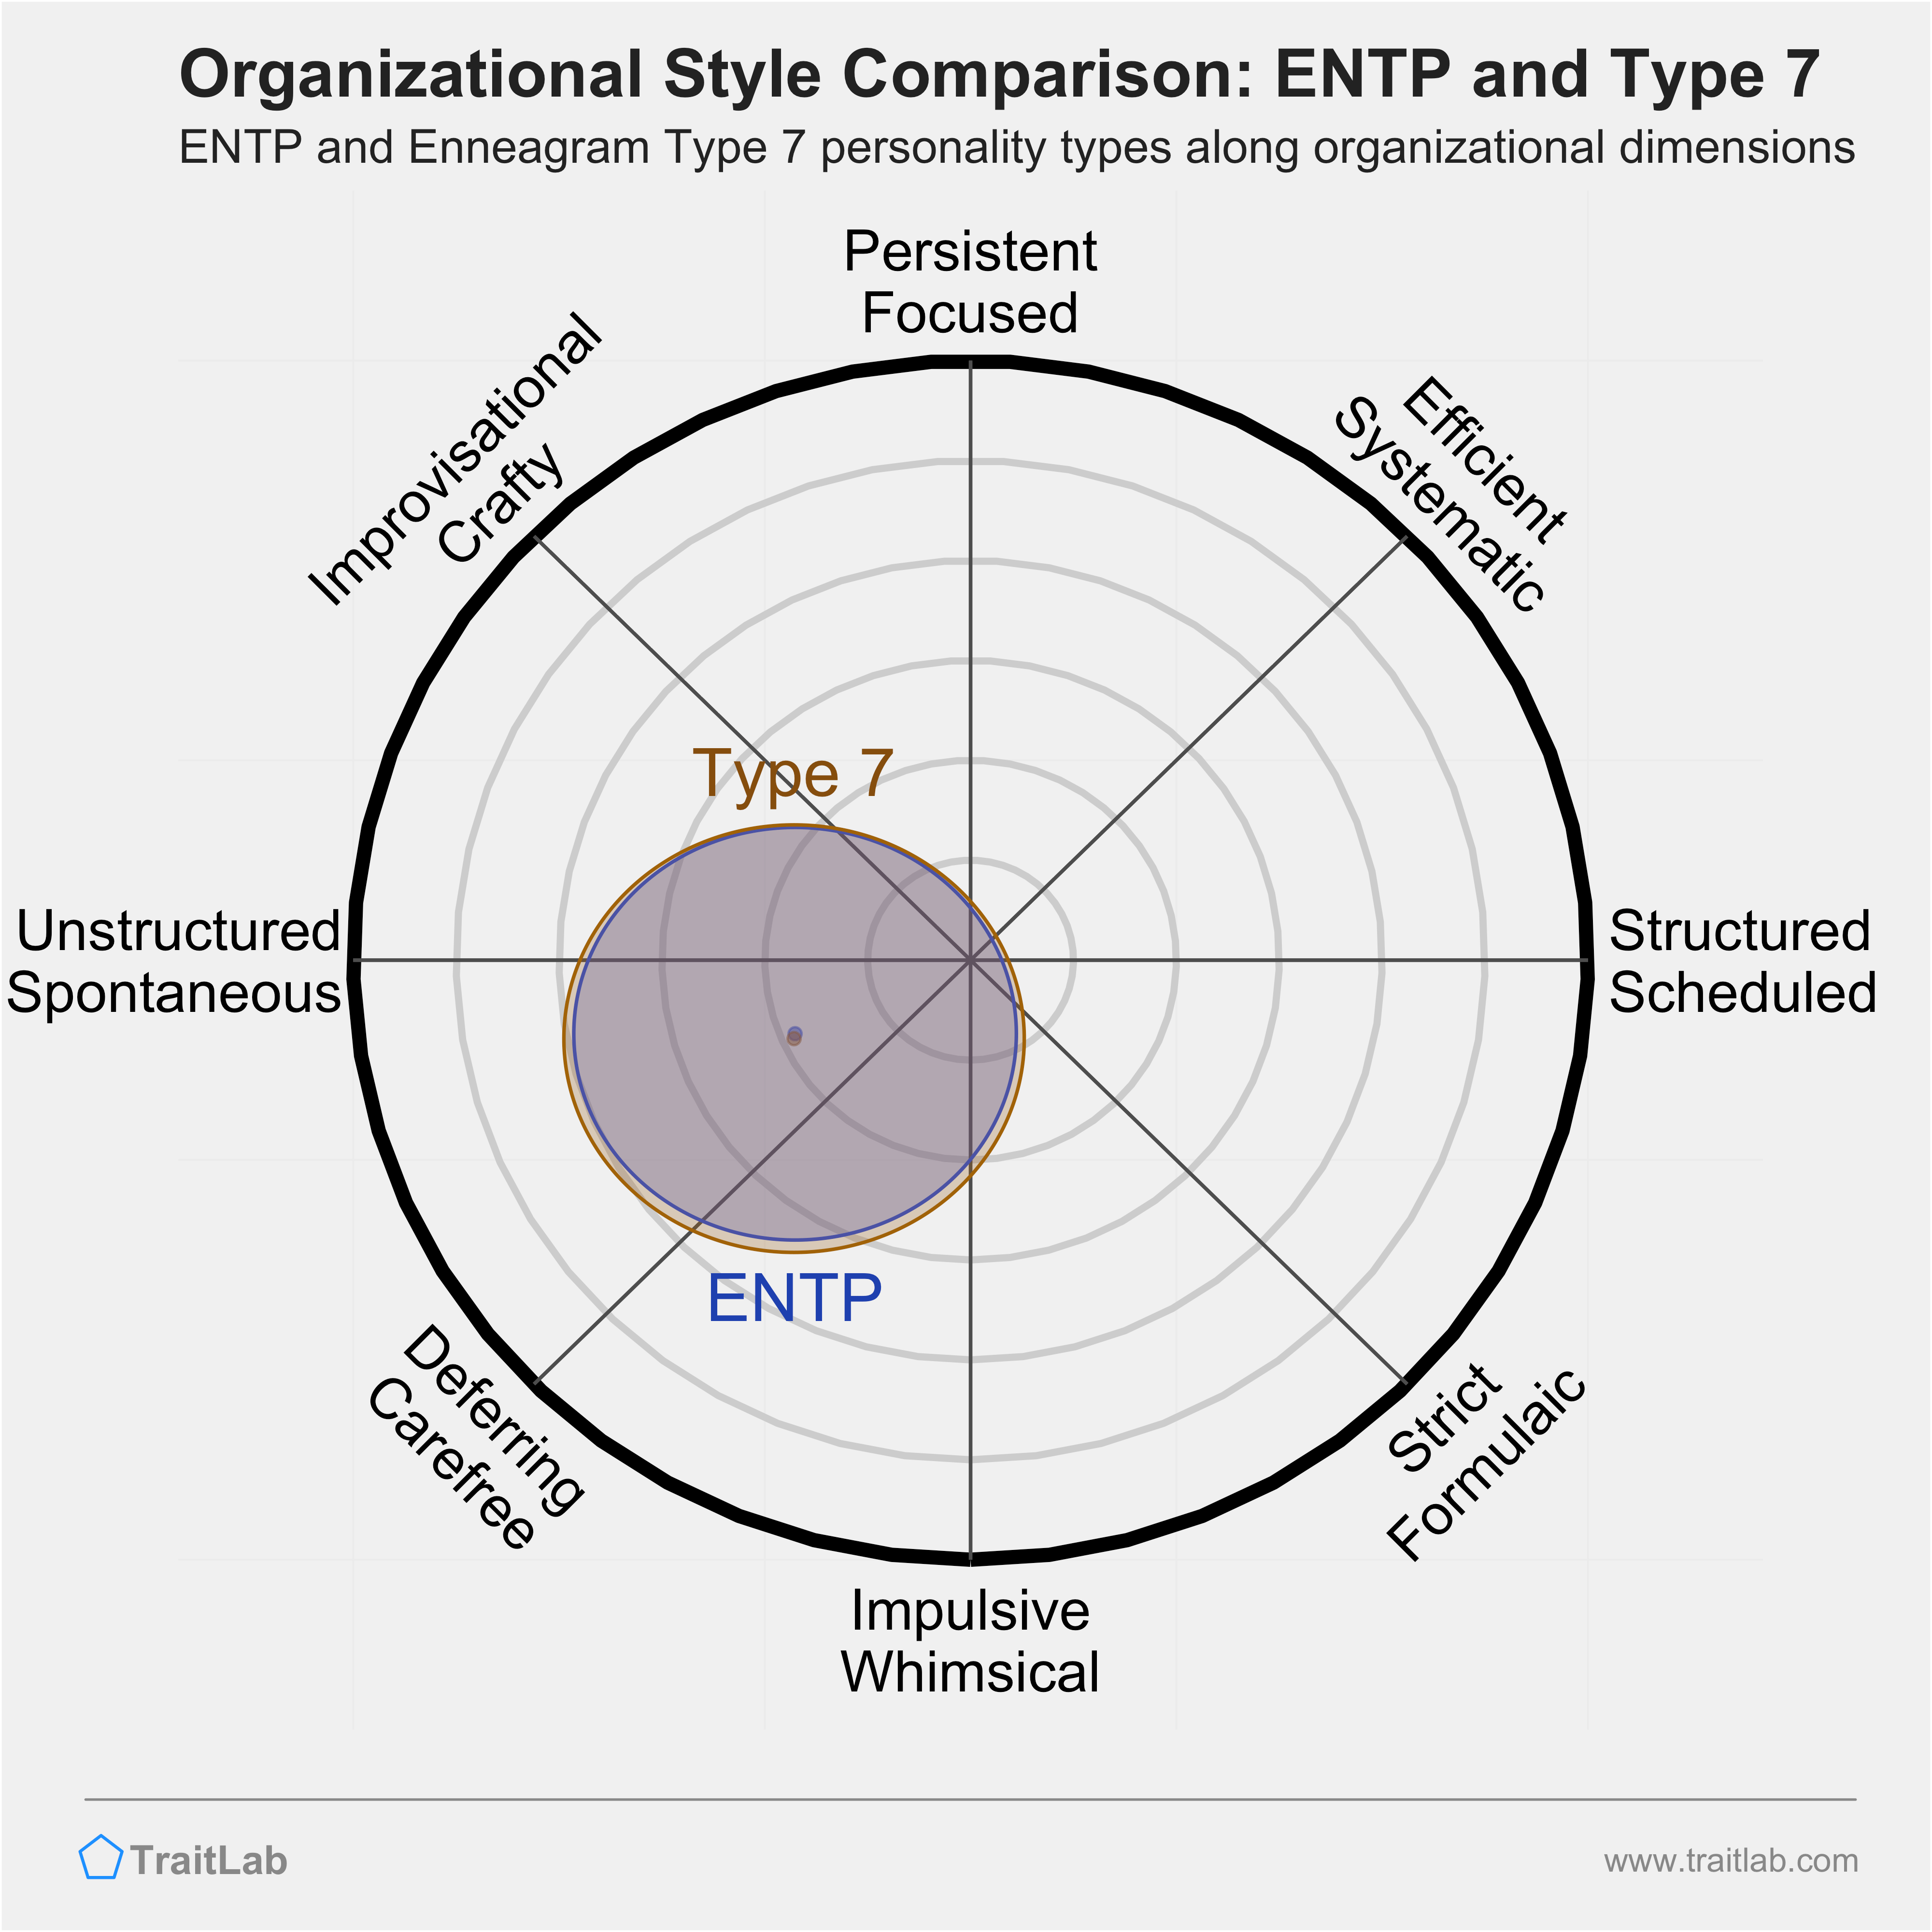 ENTP and Type 7 comparison across organizational dimensions